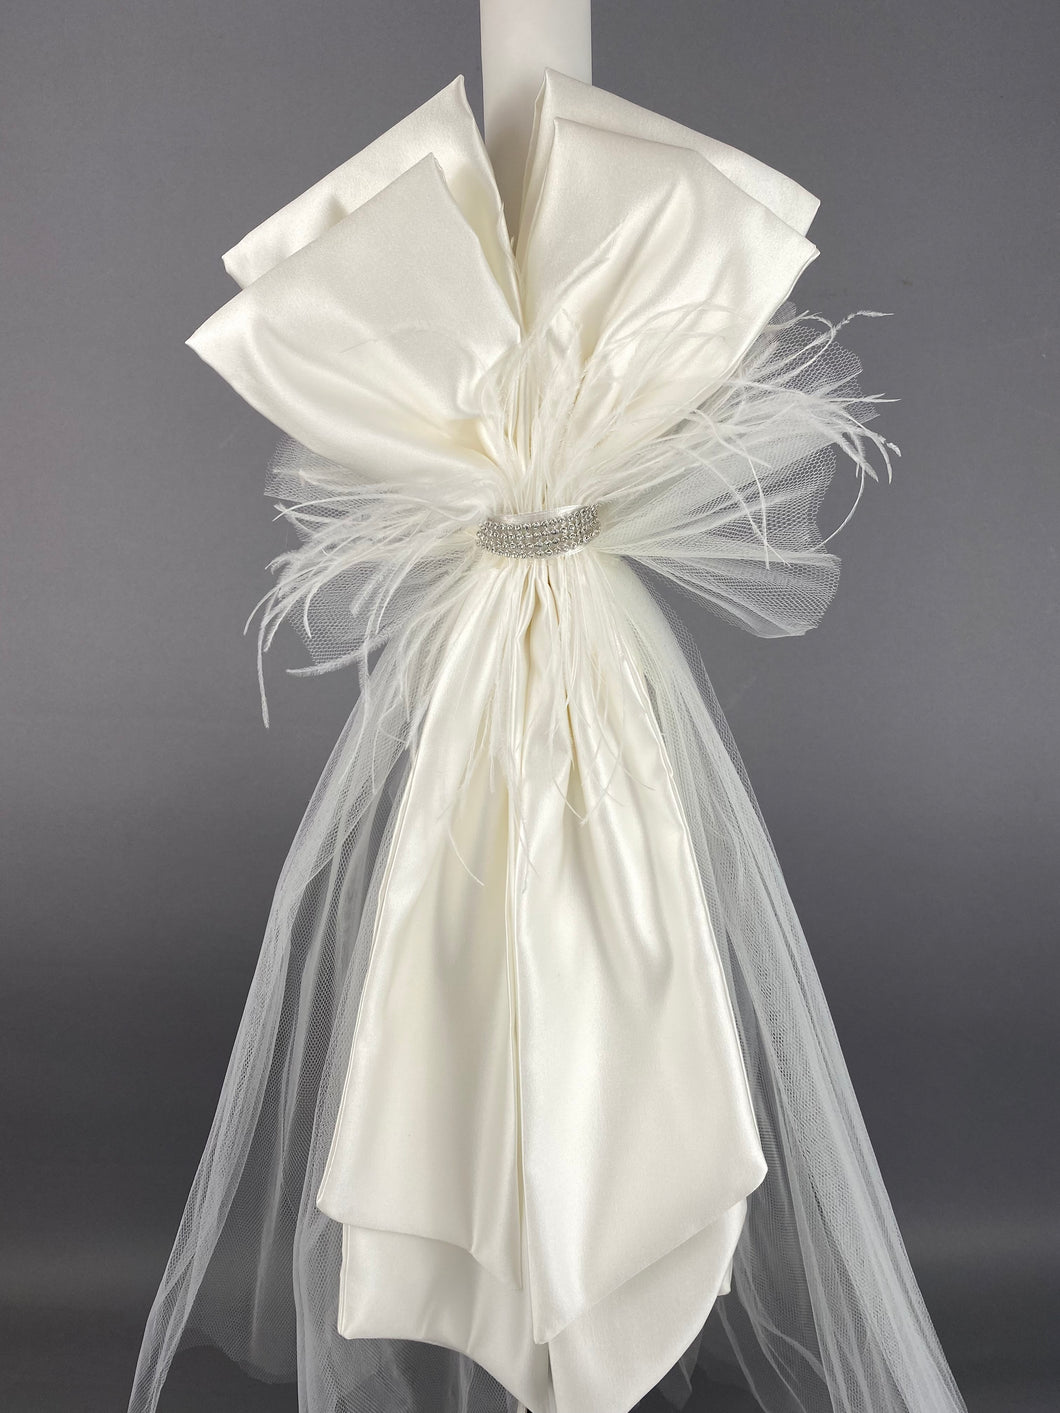 White Satin Double Bow 32” Baptismal Candle with Rhinestones and Feathers GC20223